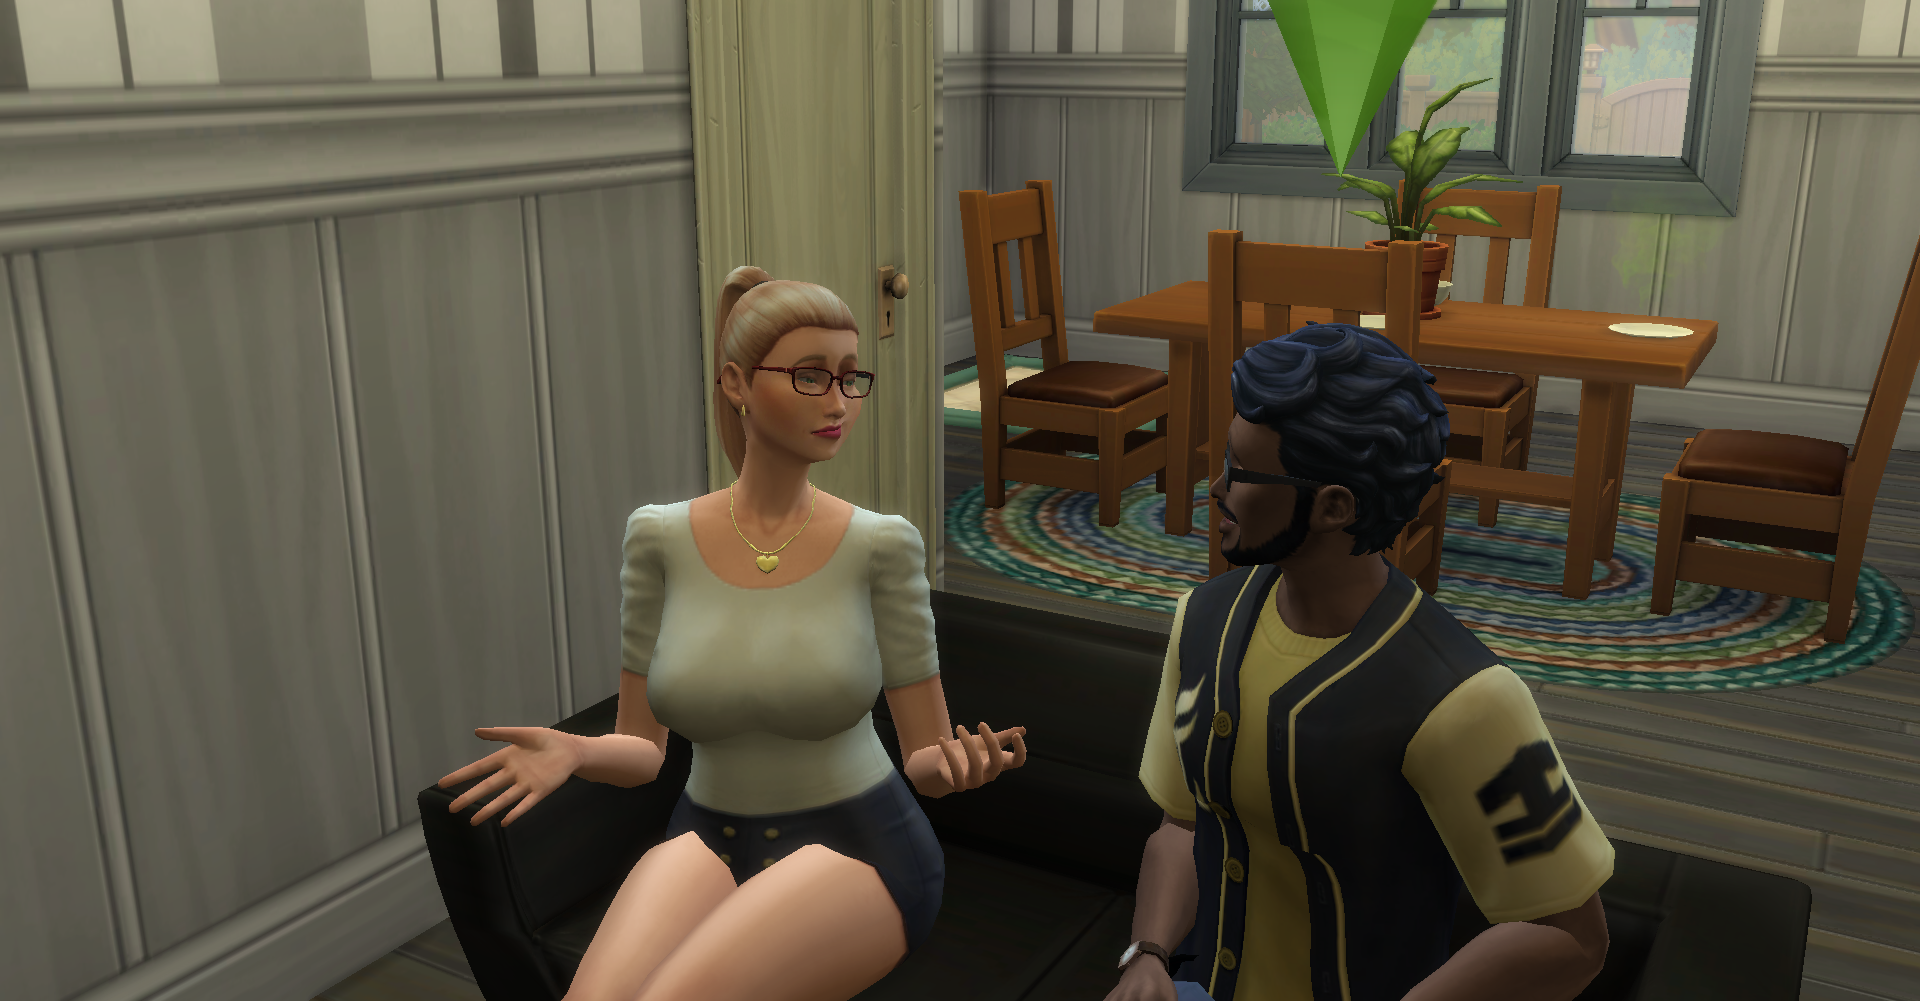 Hot Complications Sims Story Page 5 The Sims 4 General Discussion 3130